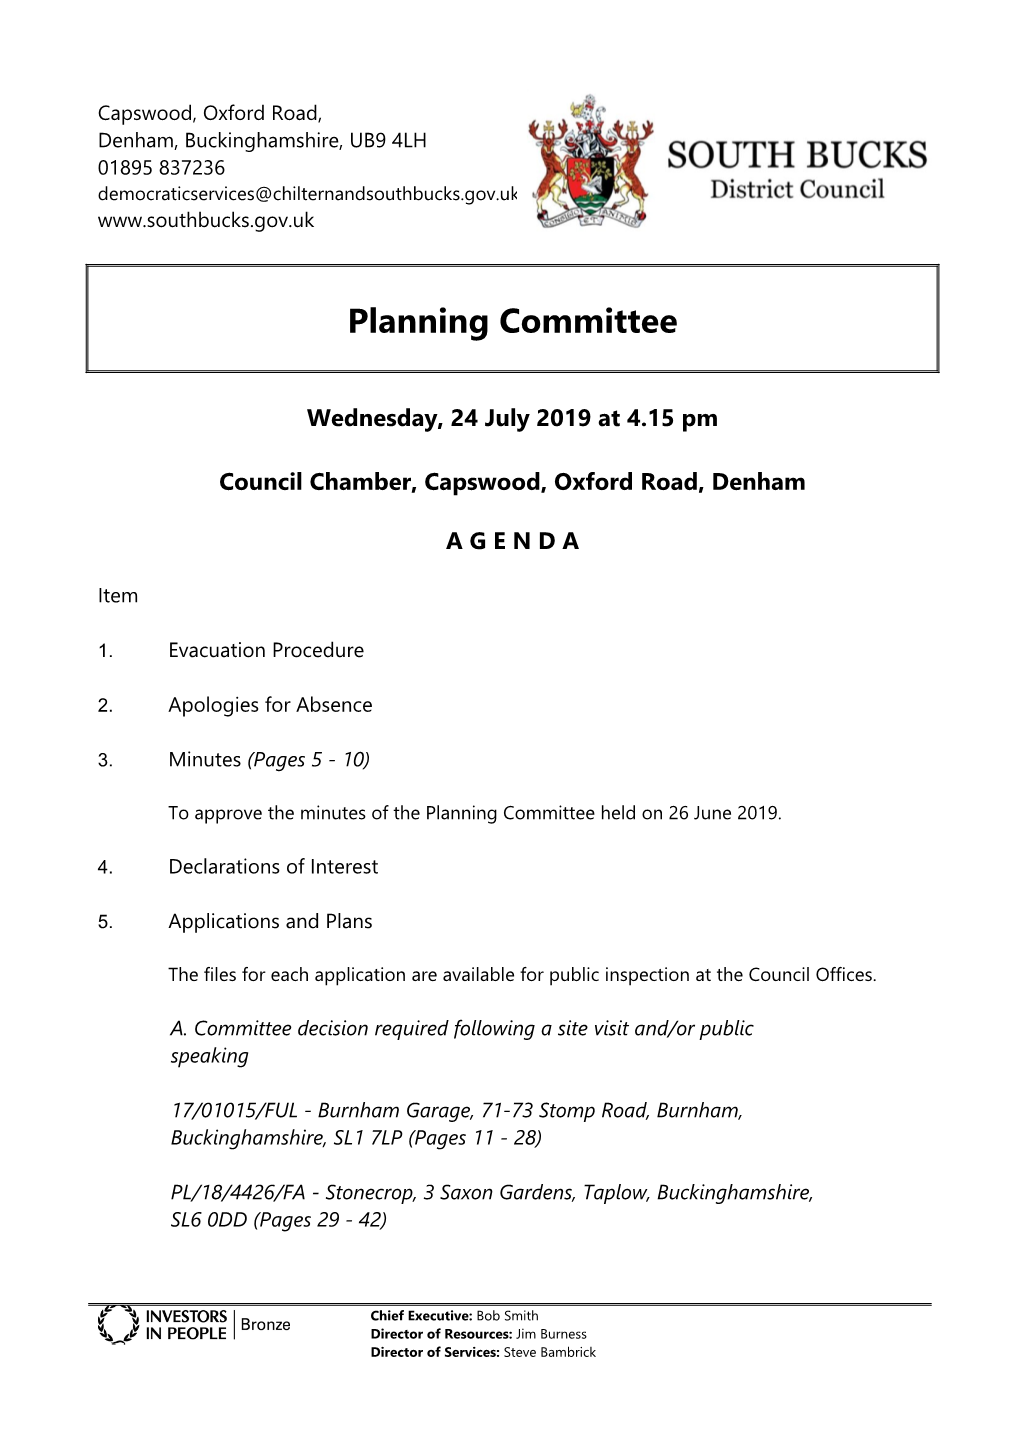 Agenda Document for Planning Committee, 24/07/2019 16:15